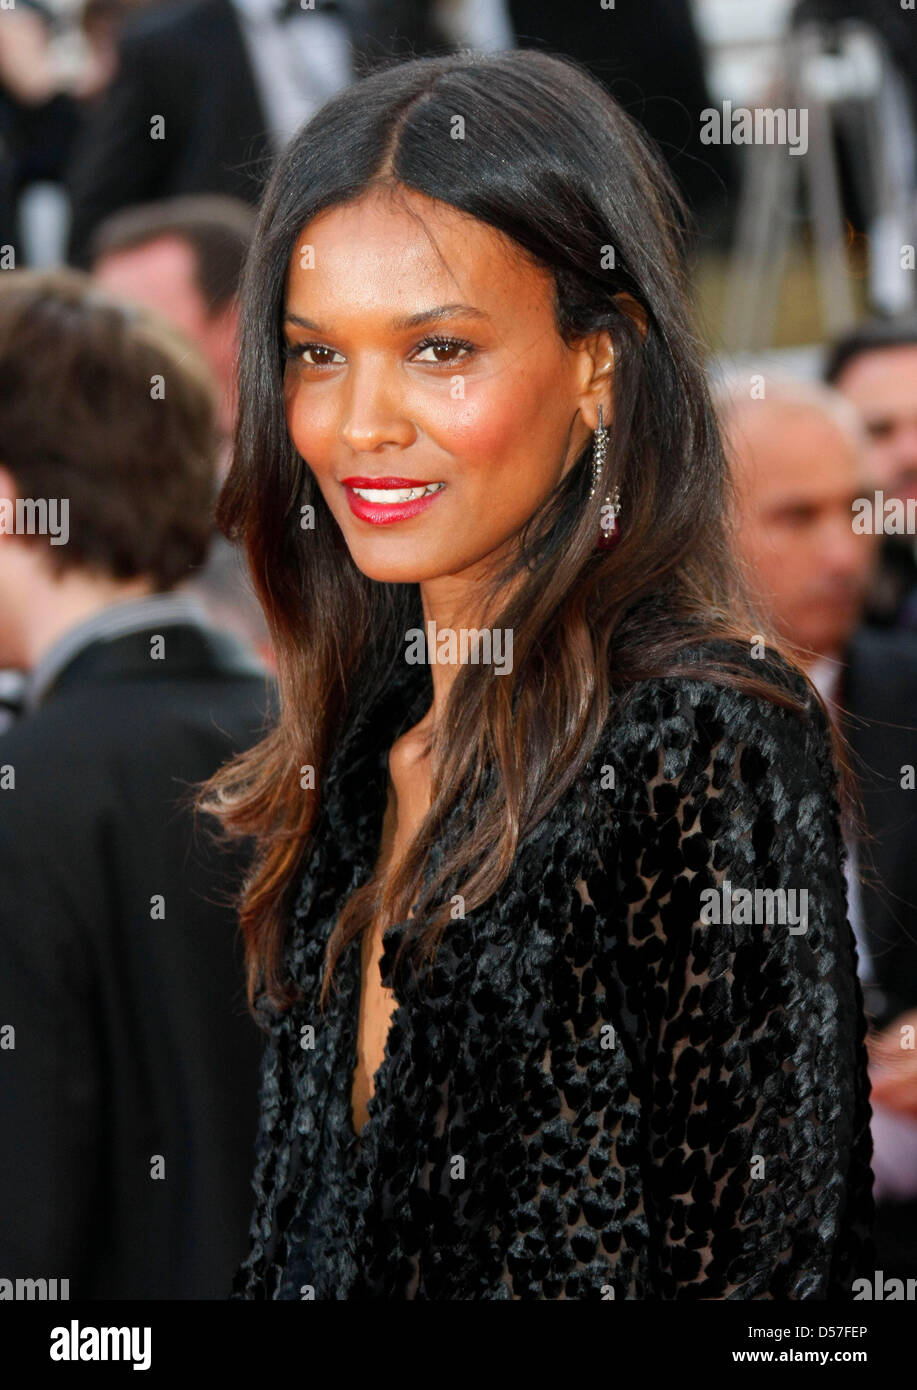 Ethiopian actress Liya Kebede attends the premiere of the movie ...